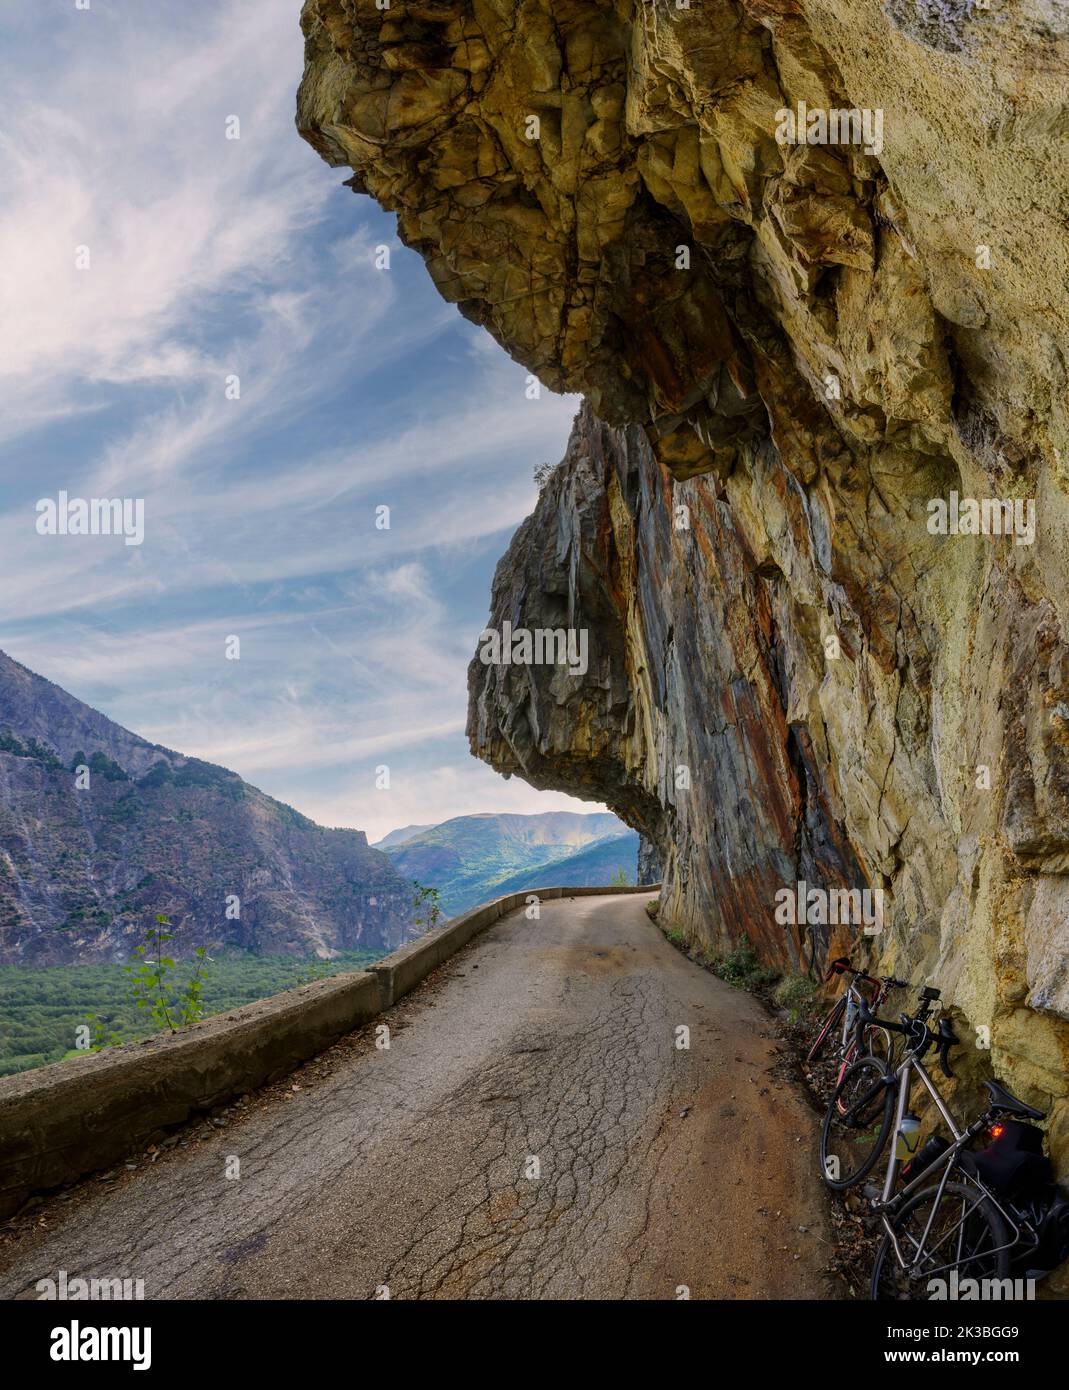 The famous balcony road that links Bourg d'Oisans to Villard Notre Dame, French Alps. Stock Photo